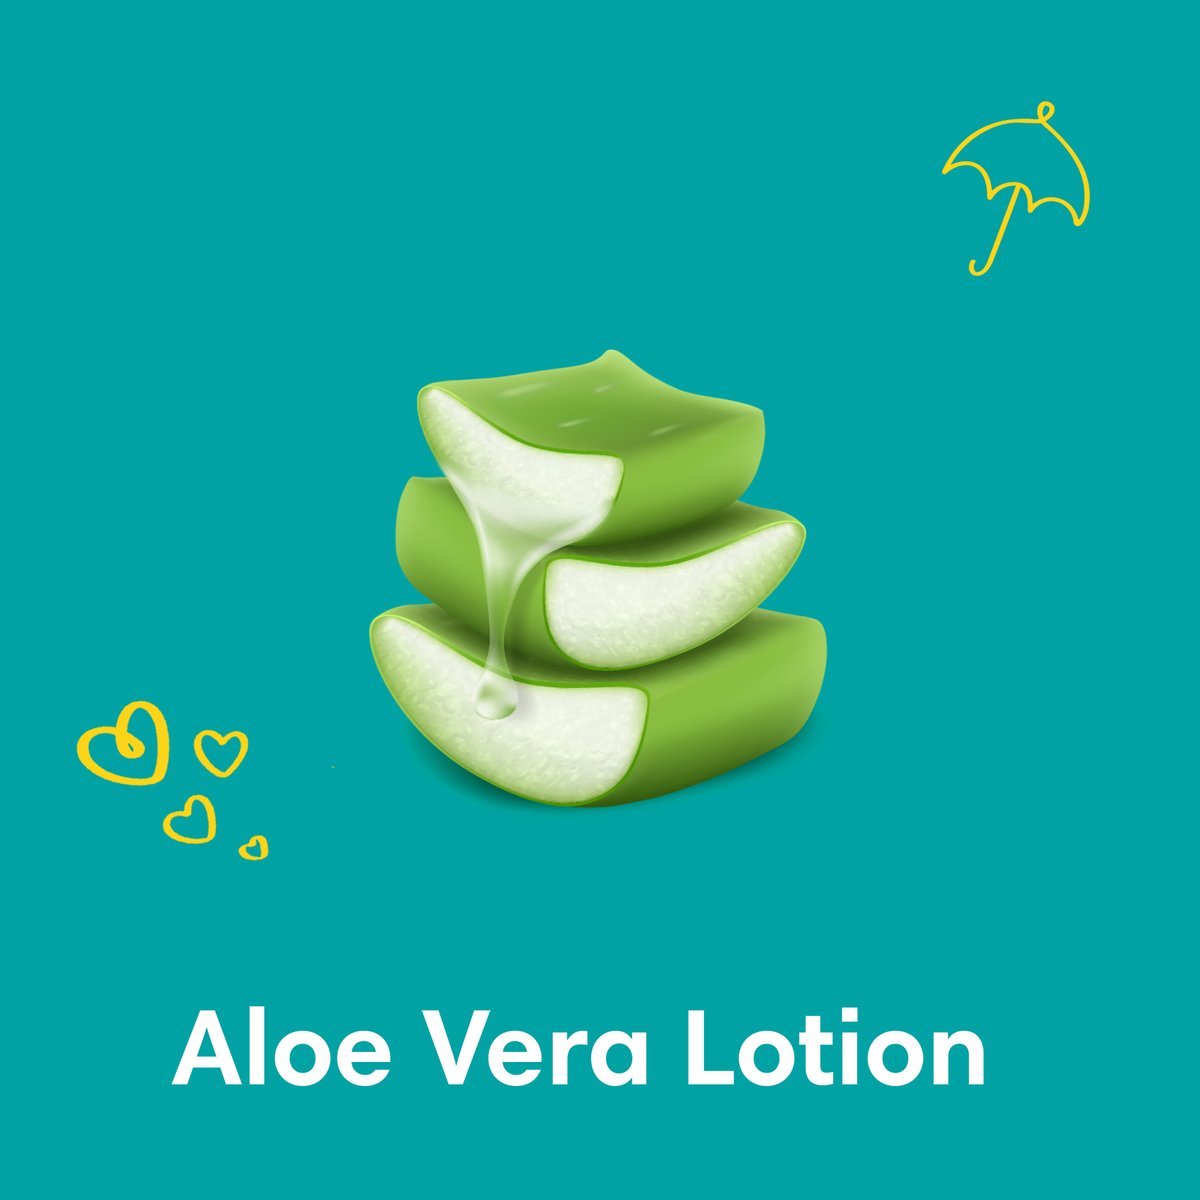 Pampers Baby-Dry Taped Diapers with Aloe Vera Lotion, up to 100% Leakage Protection, Size 4, 9-14kg, 60 pcs